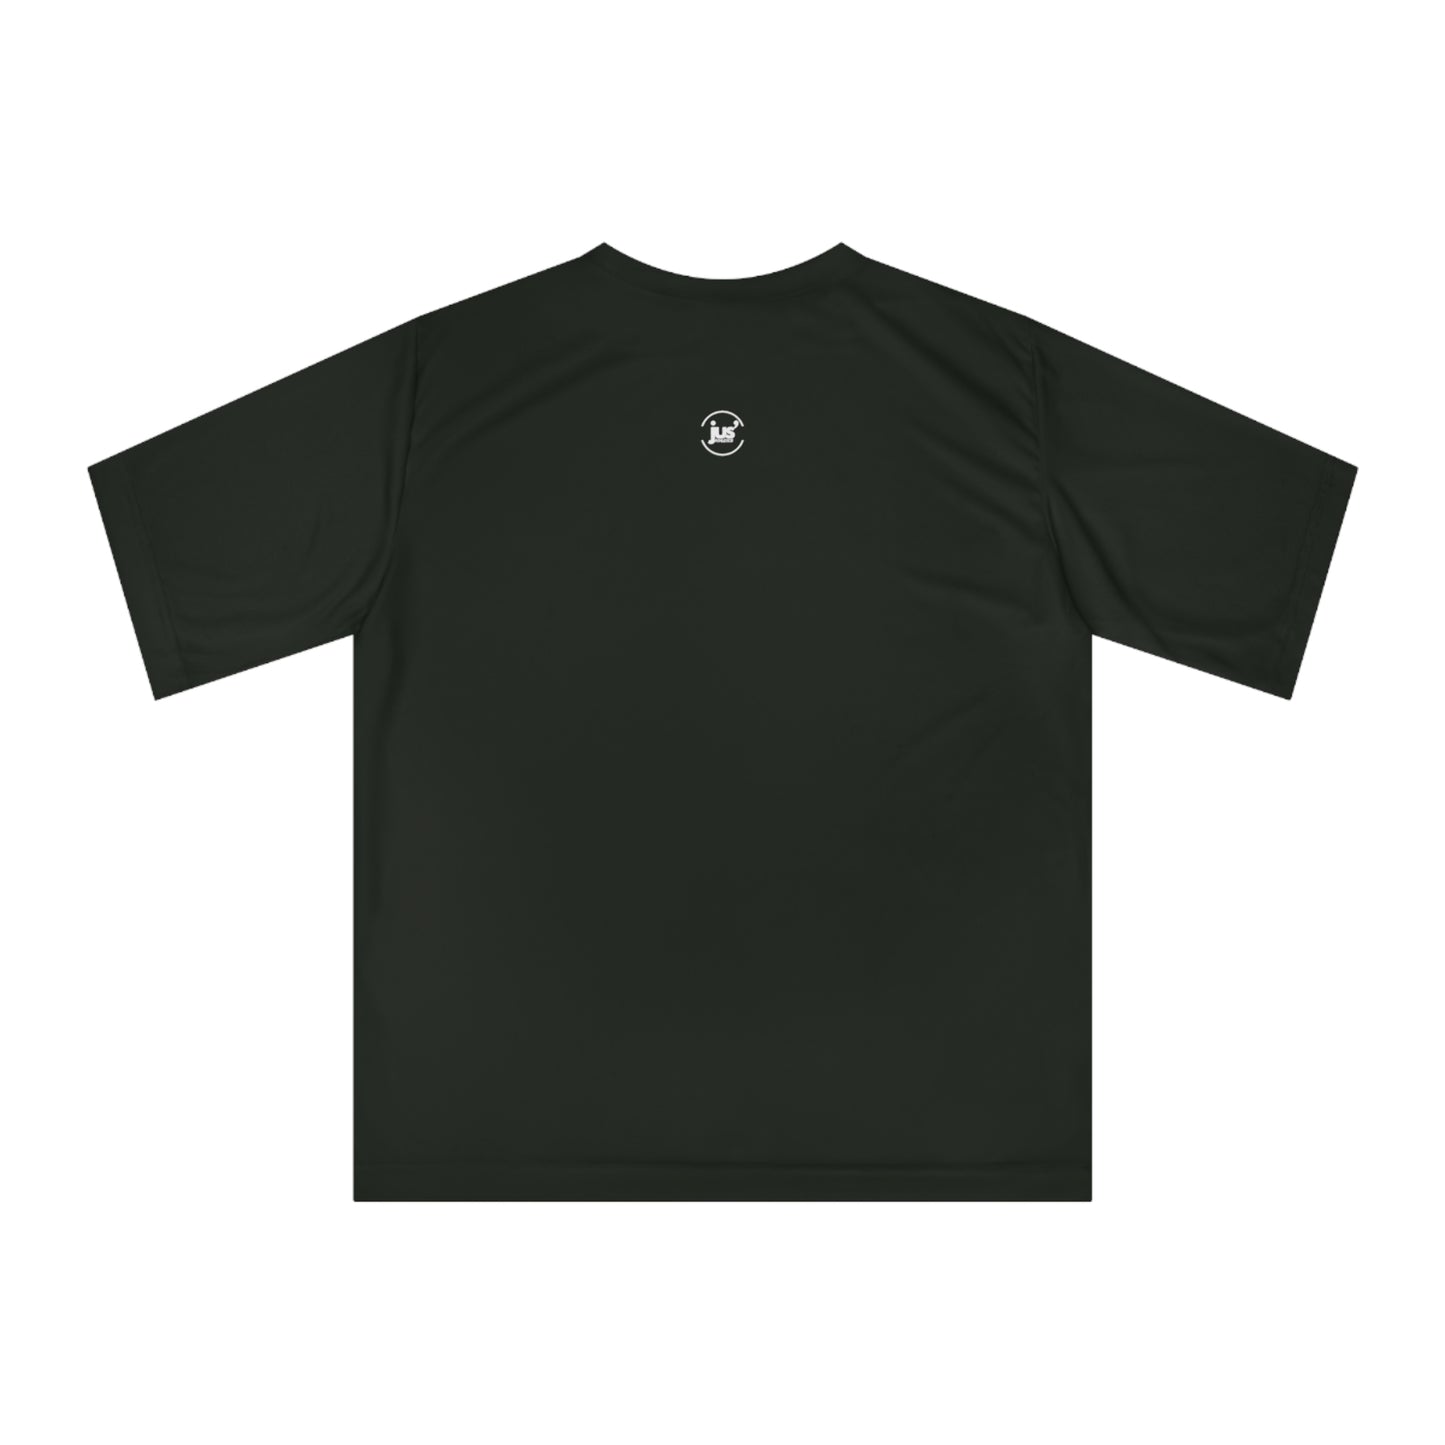 Eyes On The Prize Performance T-shirt